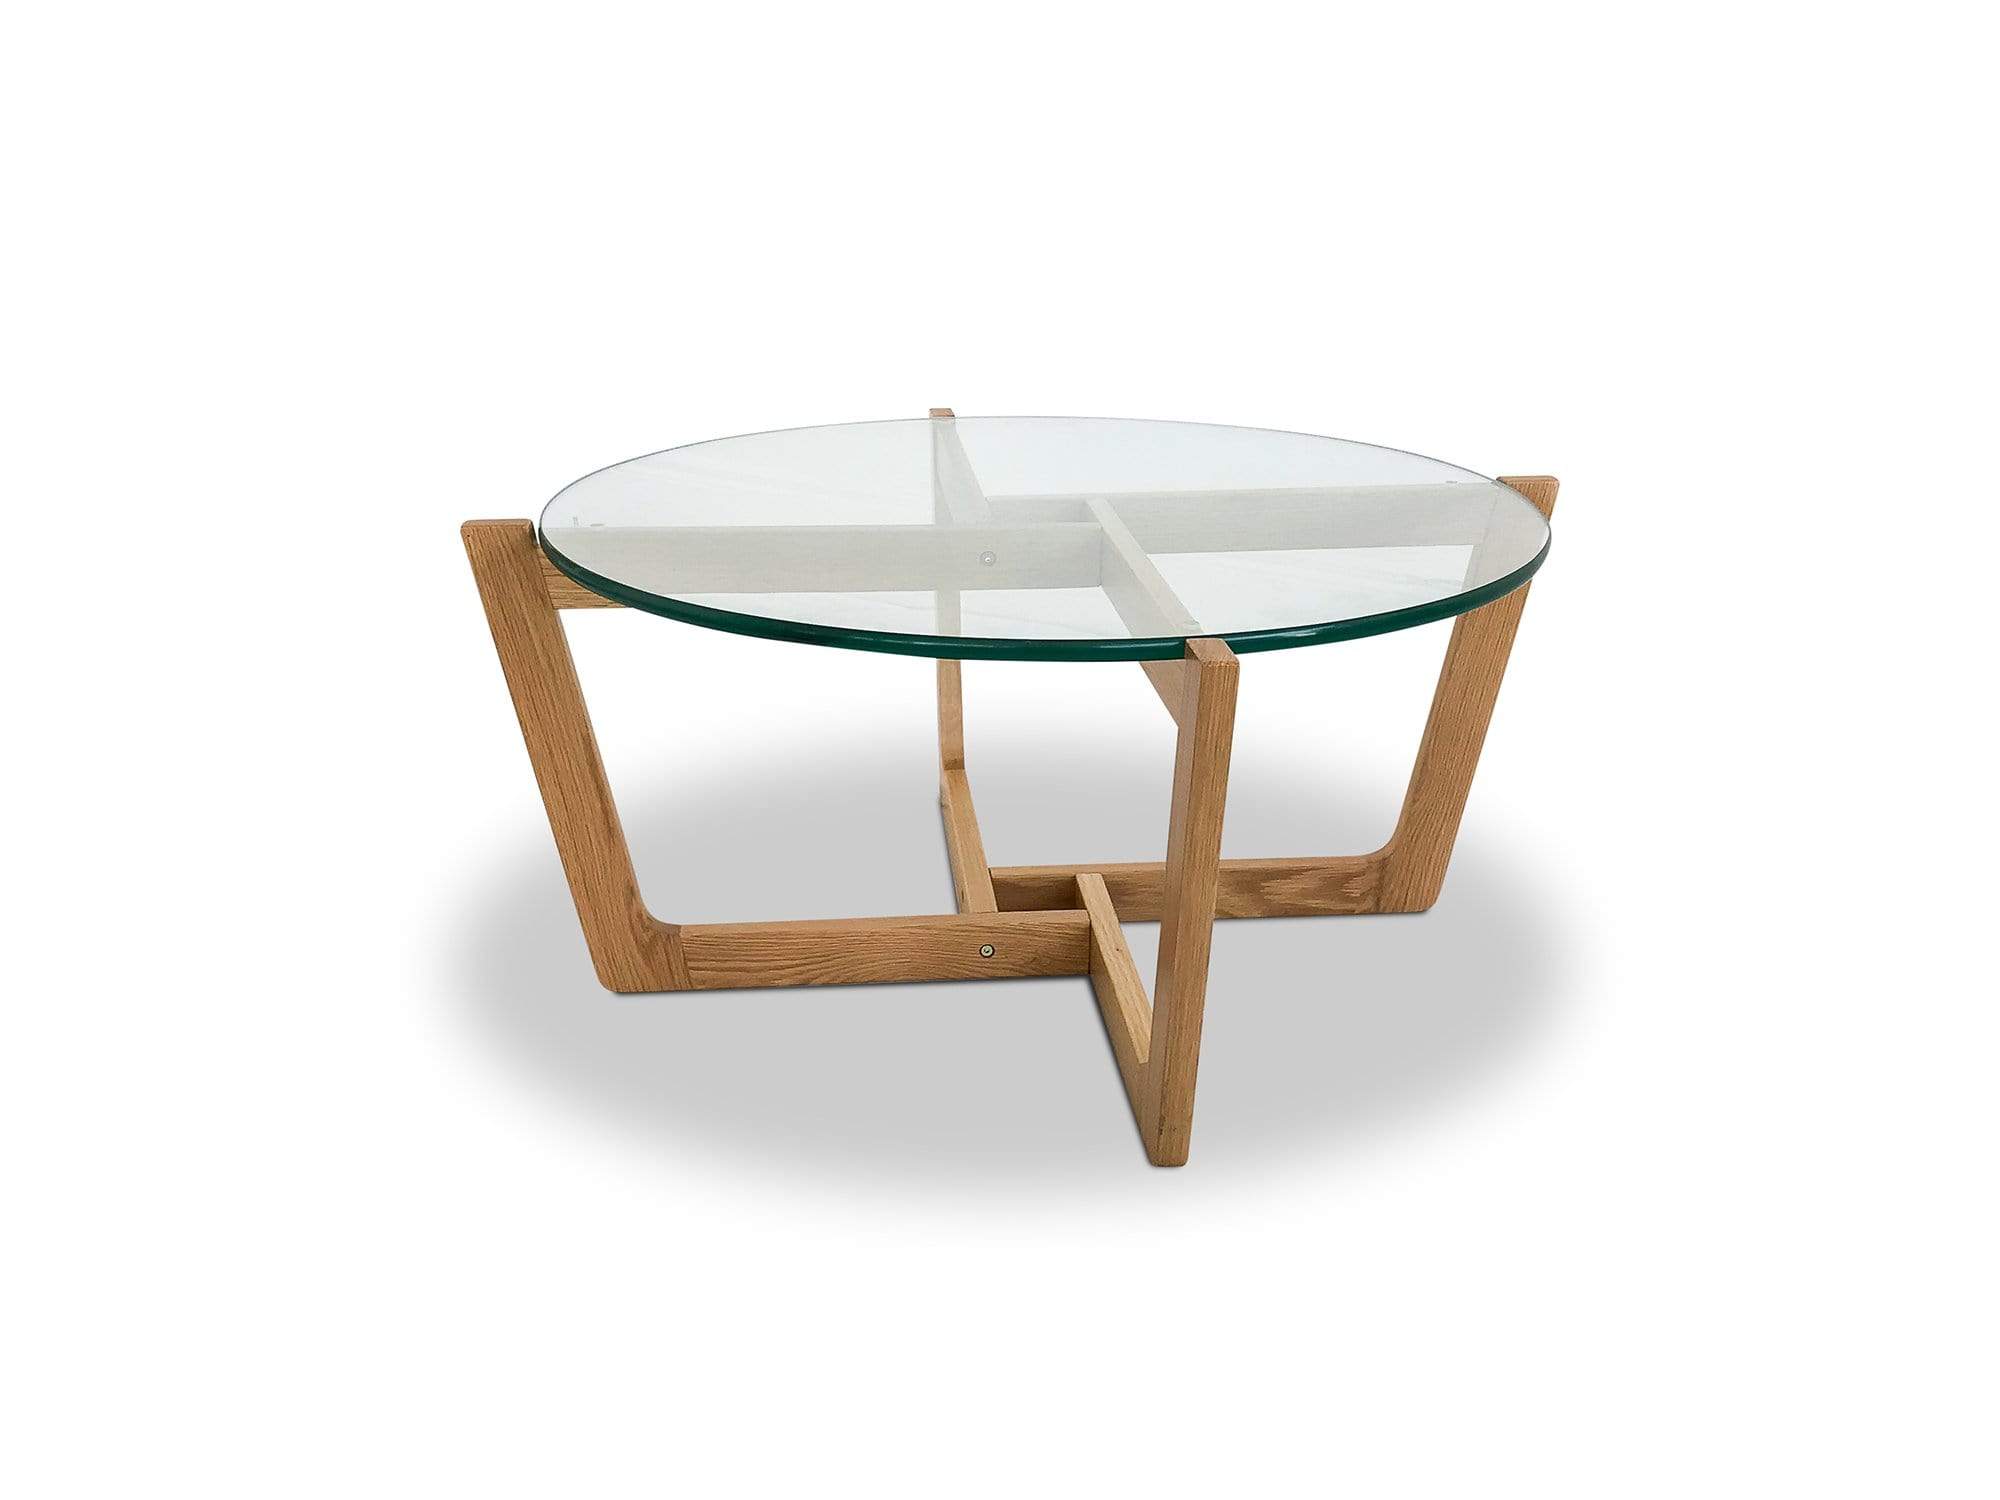 round-glass-coffee-table-home-furniture-bedding-and-outdoor-29987400917_1024x1024@2x